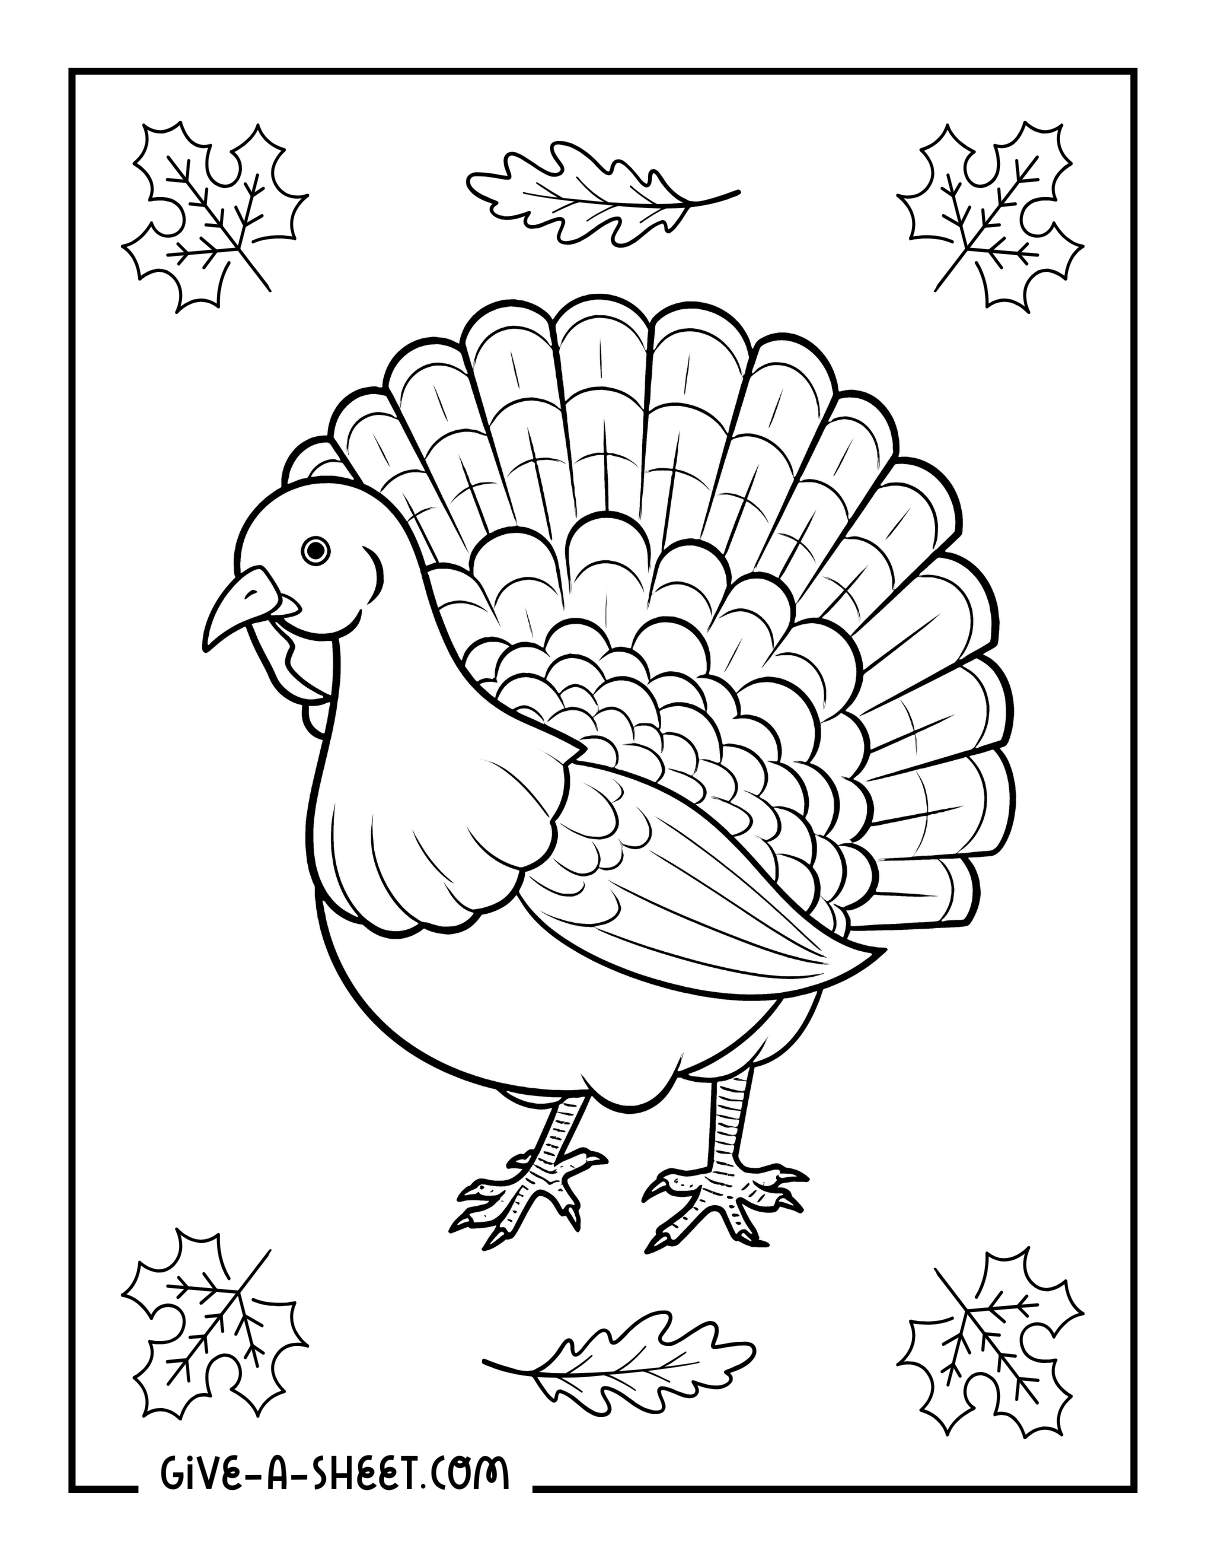 Simple turkey outline with feathers coloring sheet.